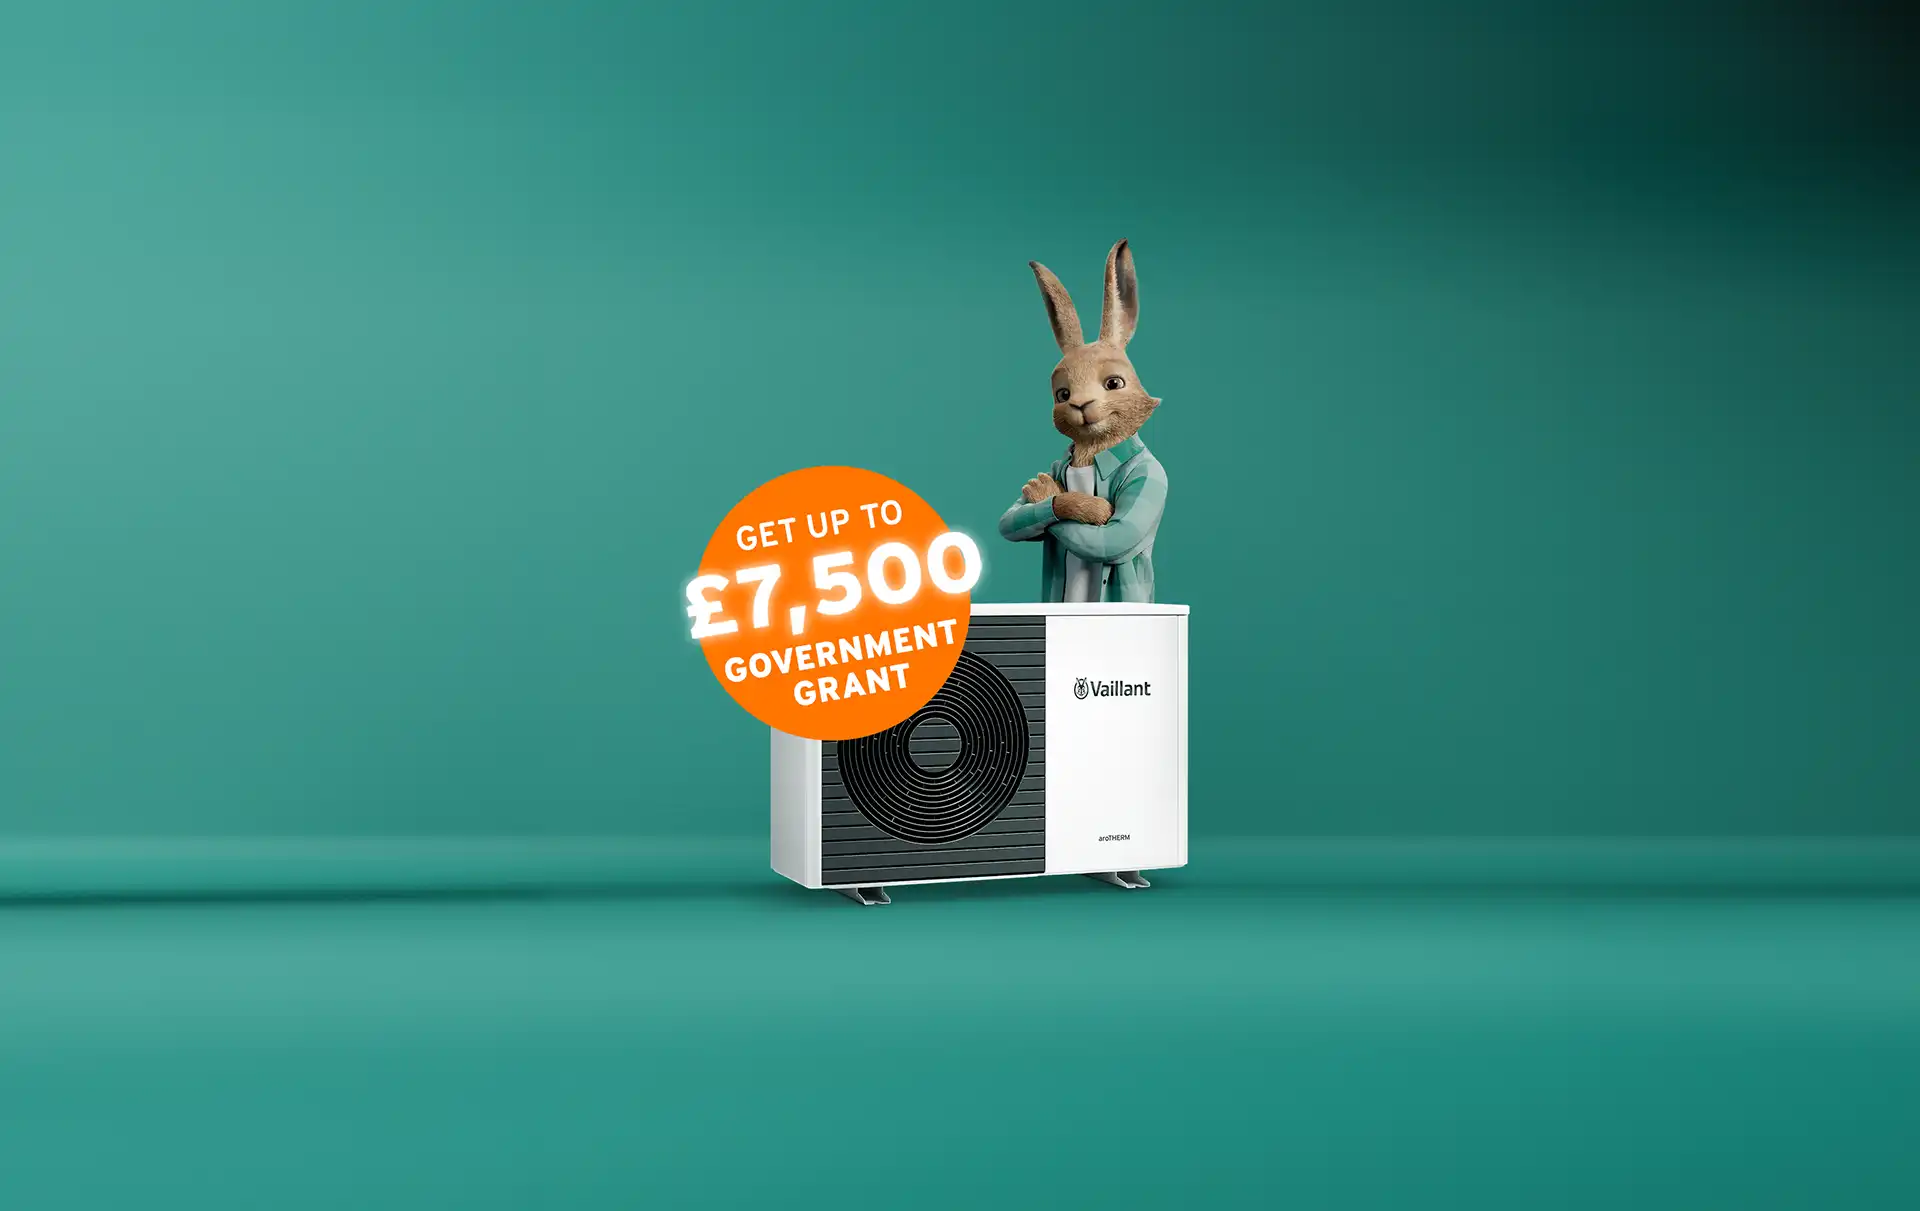 The Vaillant hare standing behind an aroTHERM plus heat pump with an orange circle sticker saying 'Get up to £7,500 government grant'